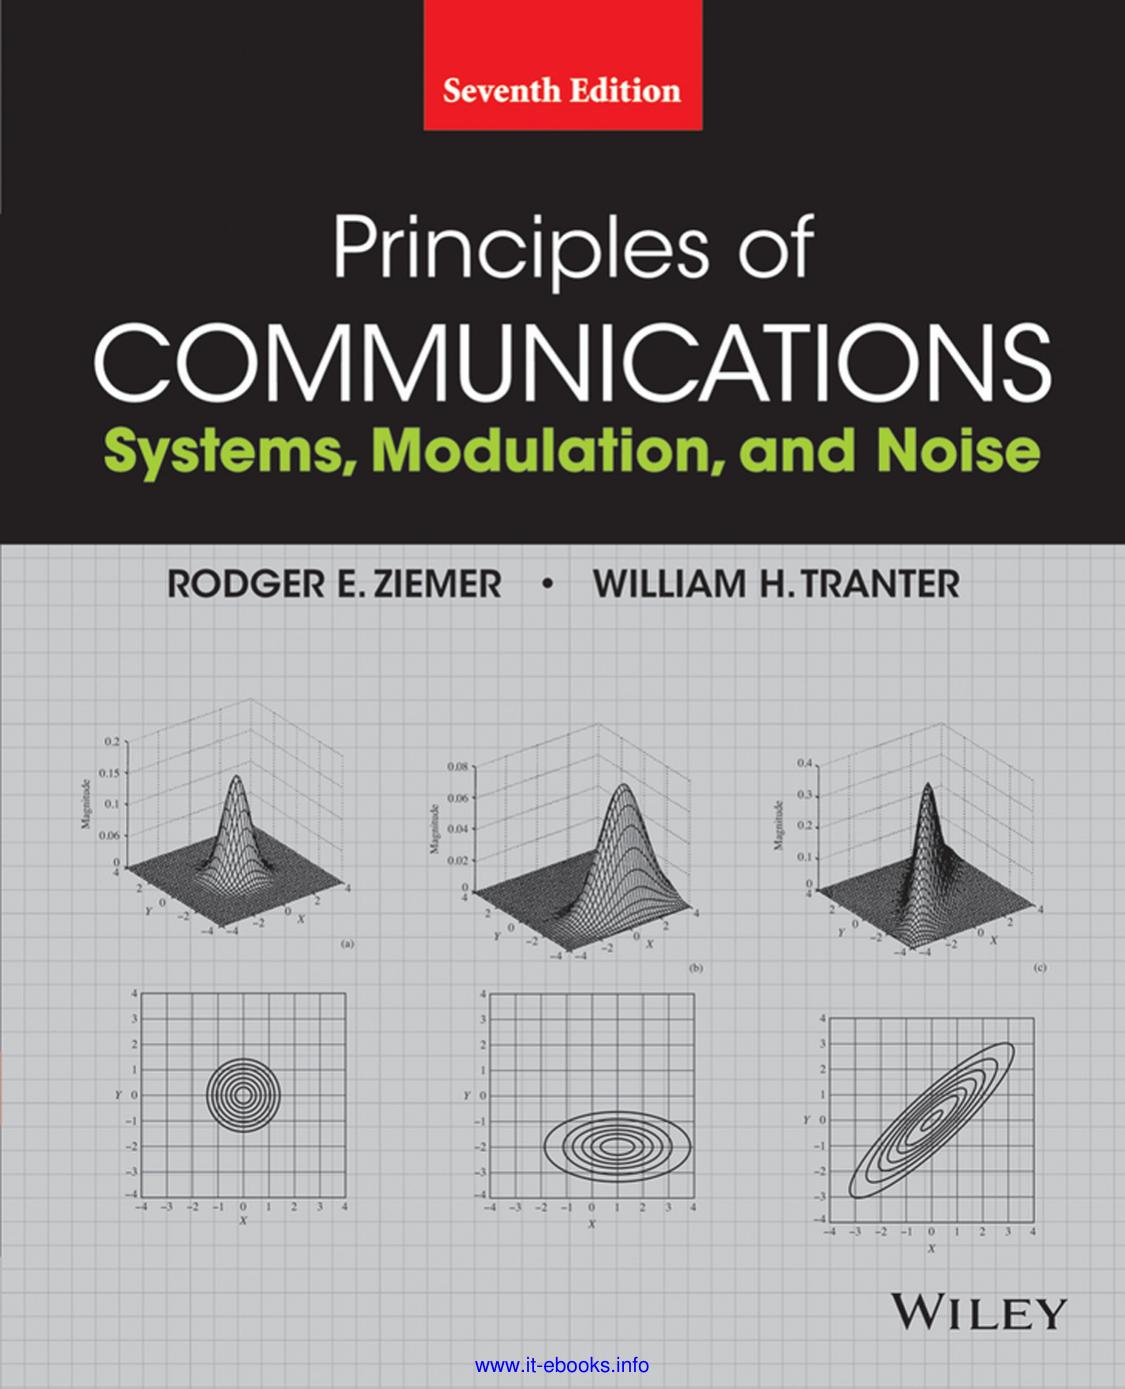 PRINCIPLES OF COMMUNICATIONS: Systems, Modulation, and Noise